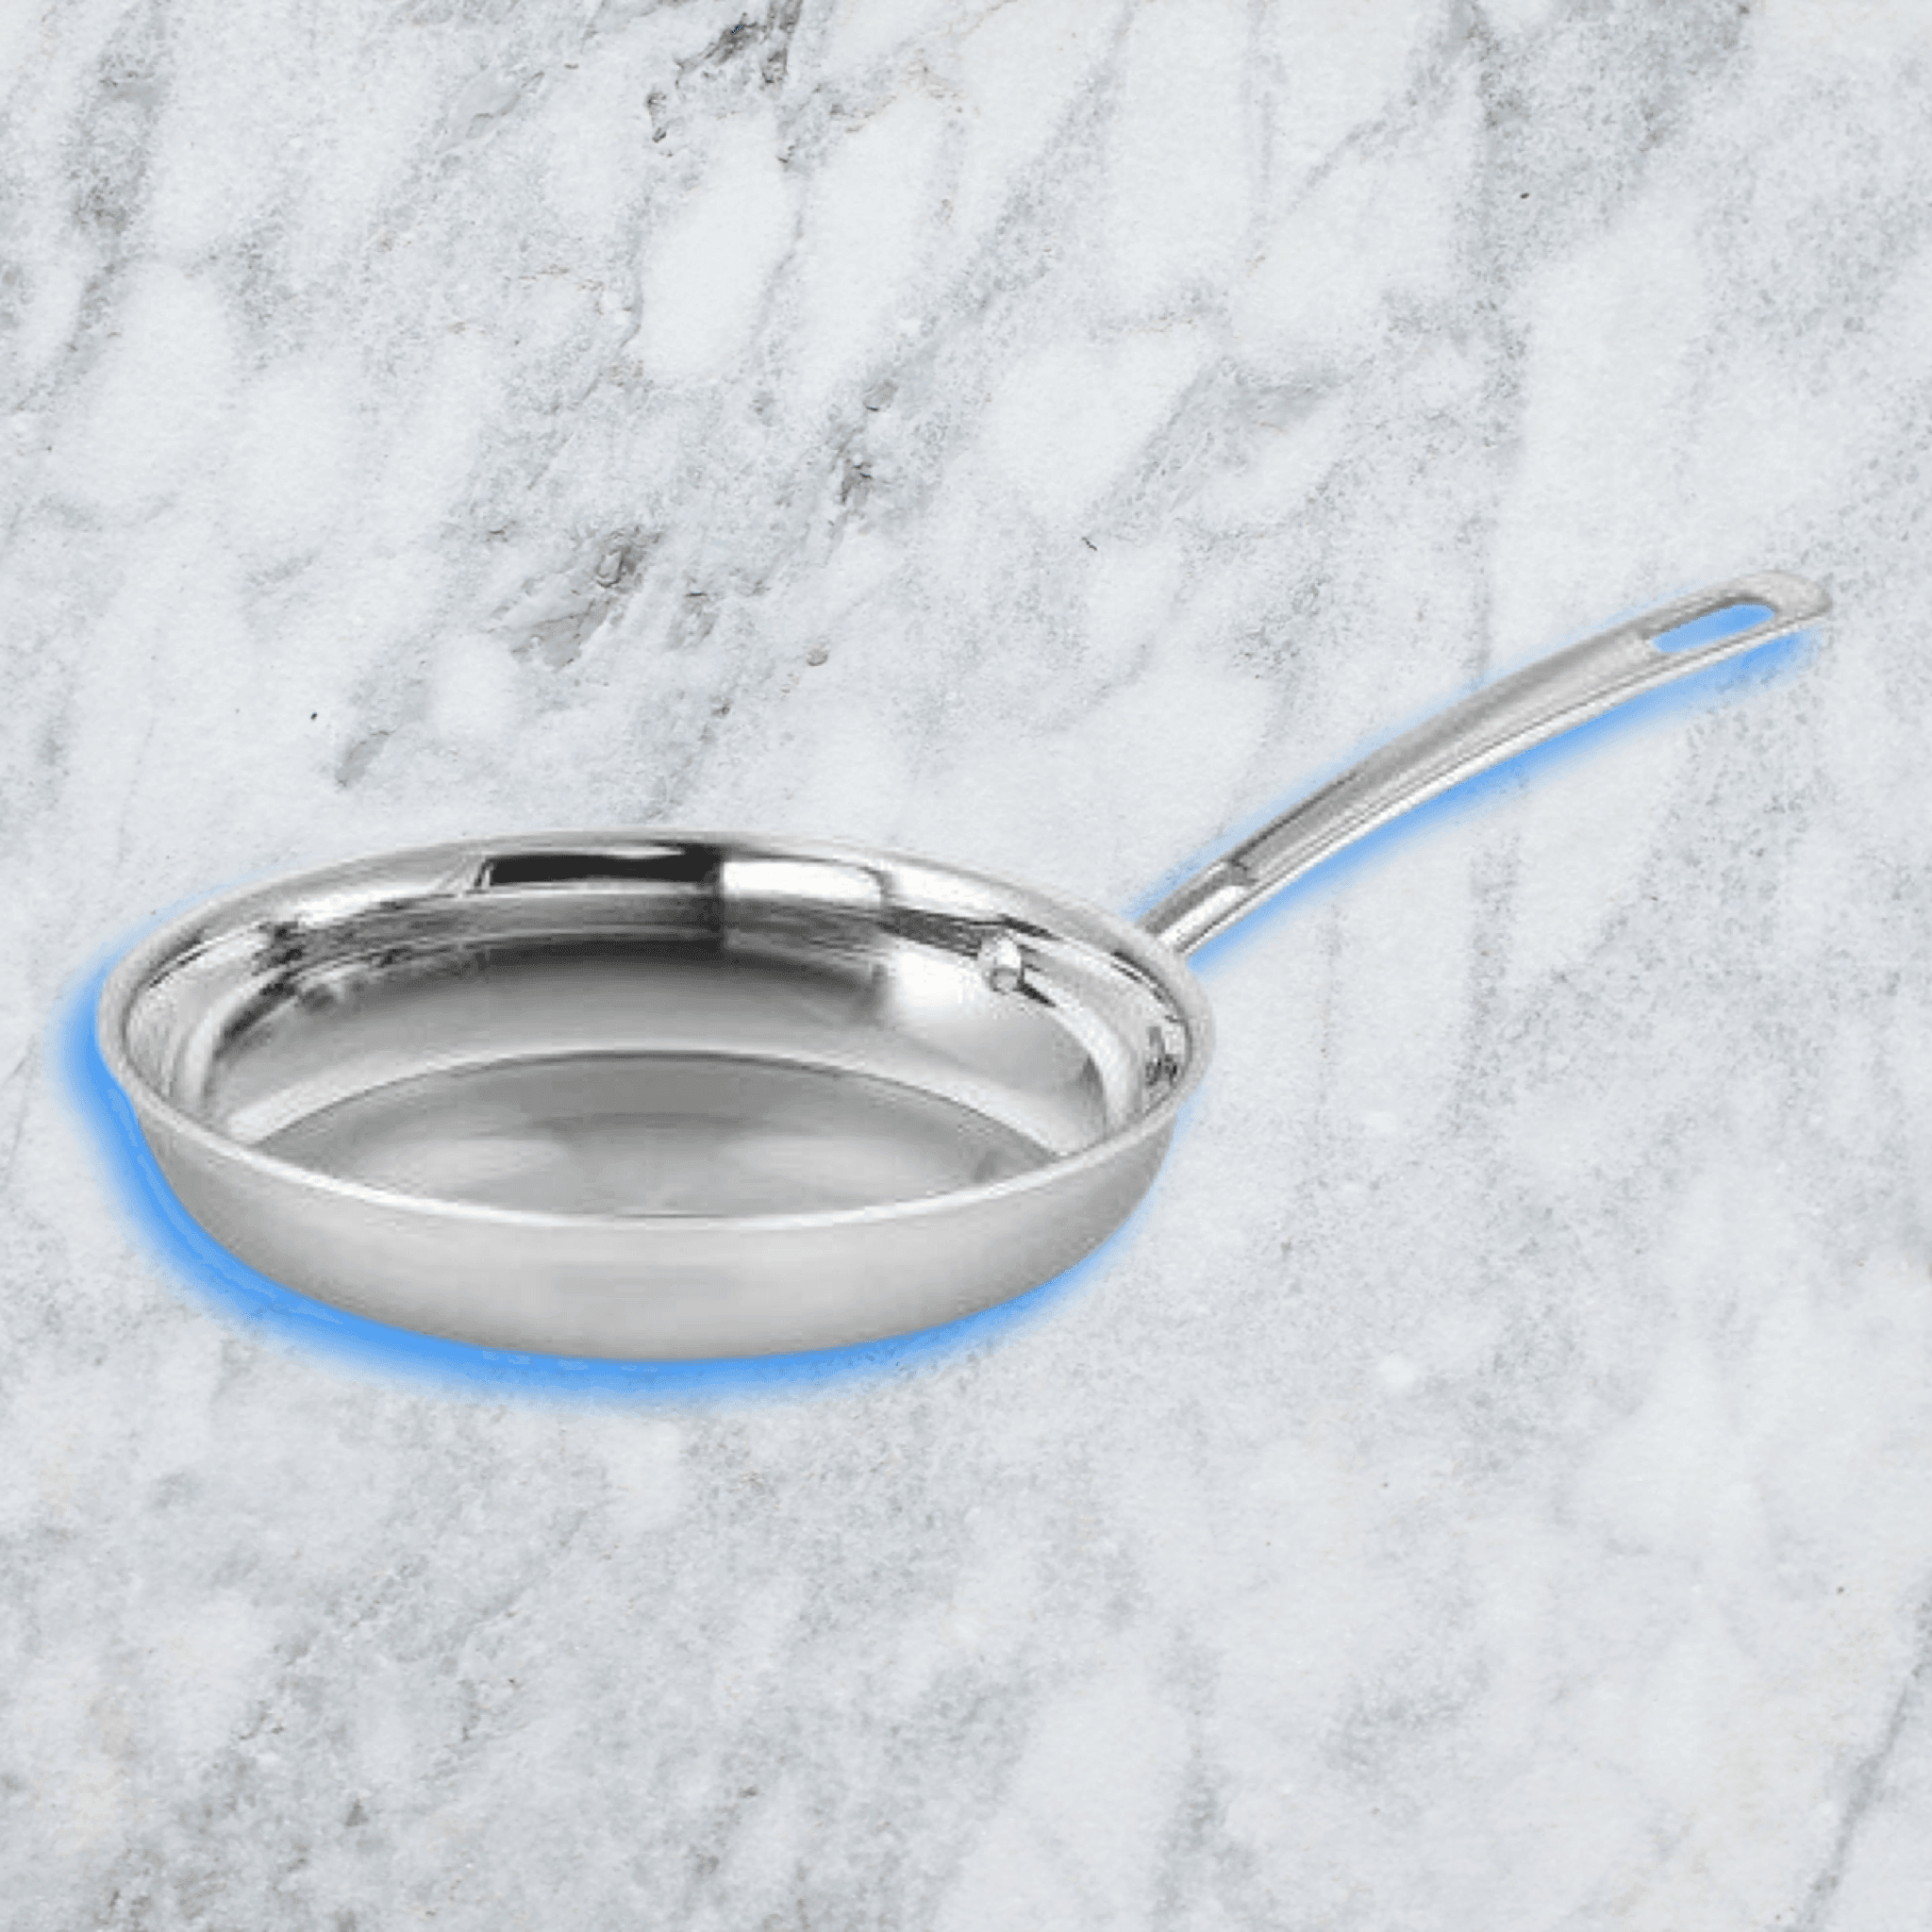 Stainless Steel Pro 8 Inch Open Frypan